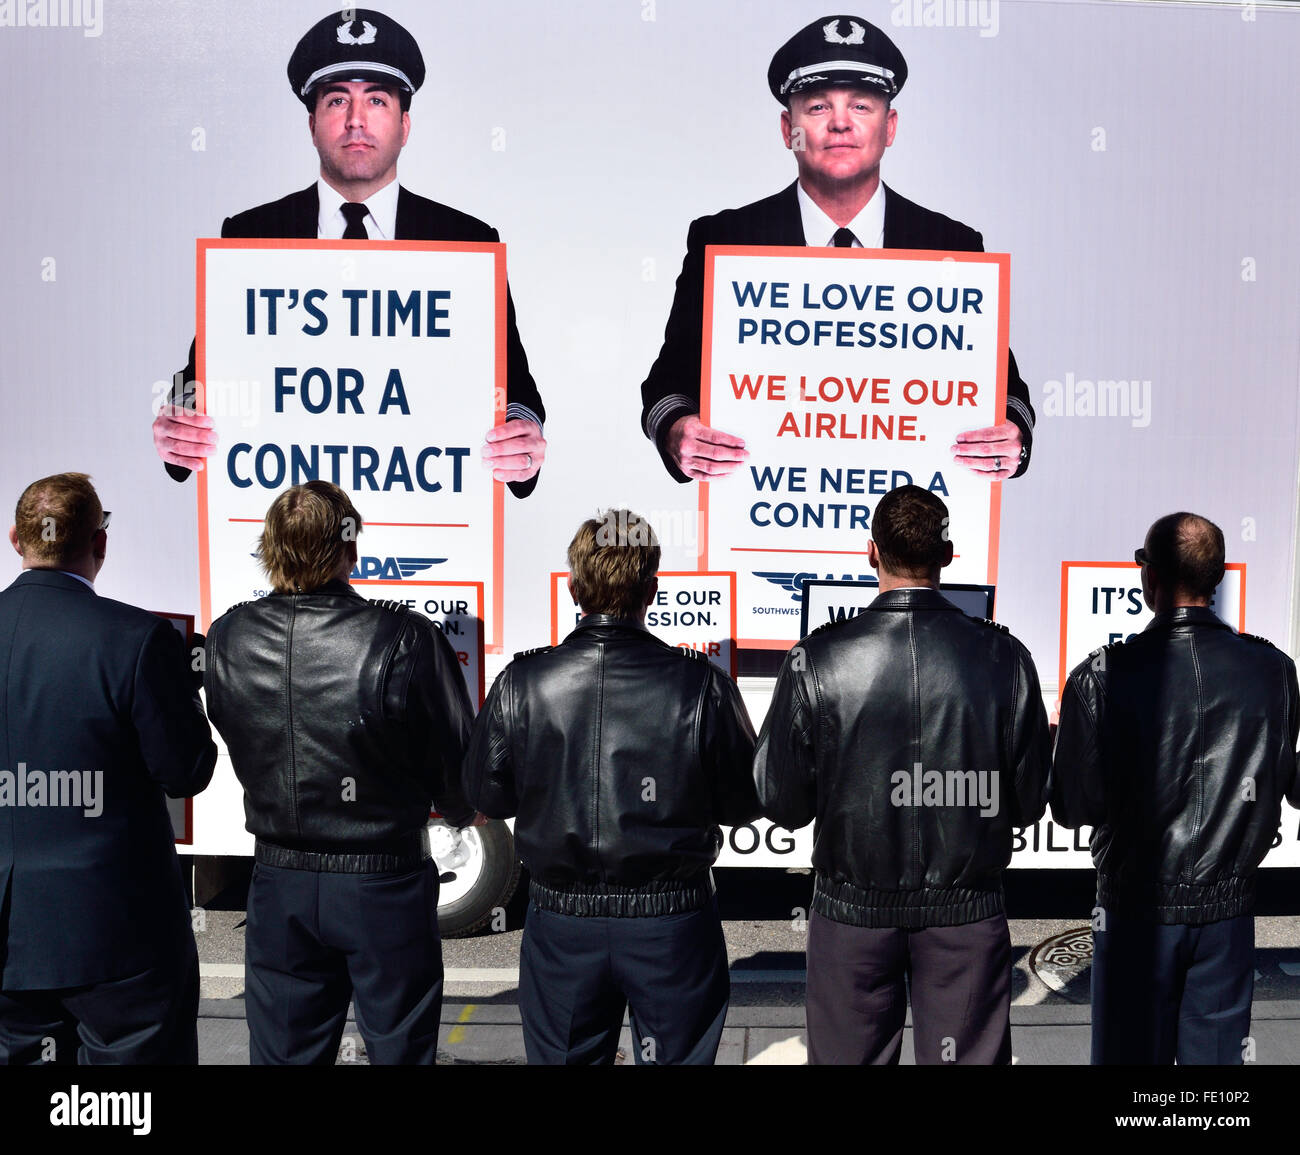 About 100 Southwest Airlines pilots silently protest in support for a contract outside of Love Field  Credit:  Brian T. Humek/Alamy Live News Stock Photo